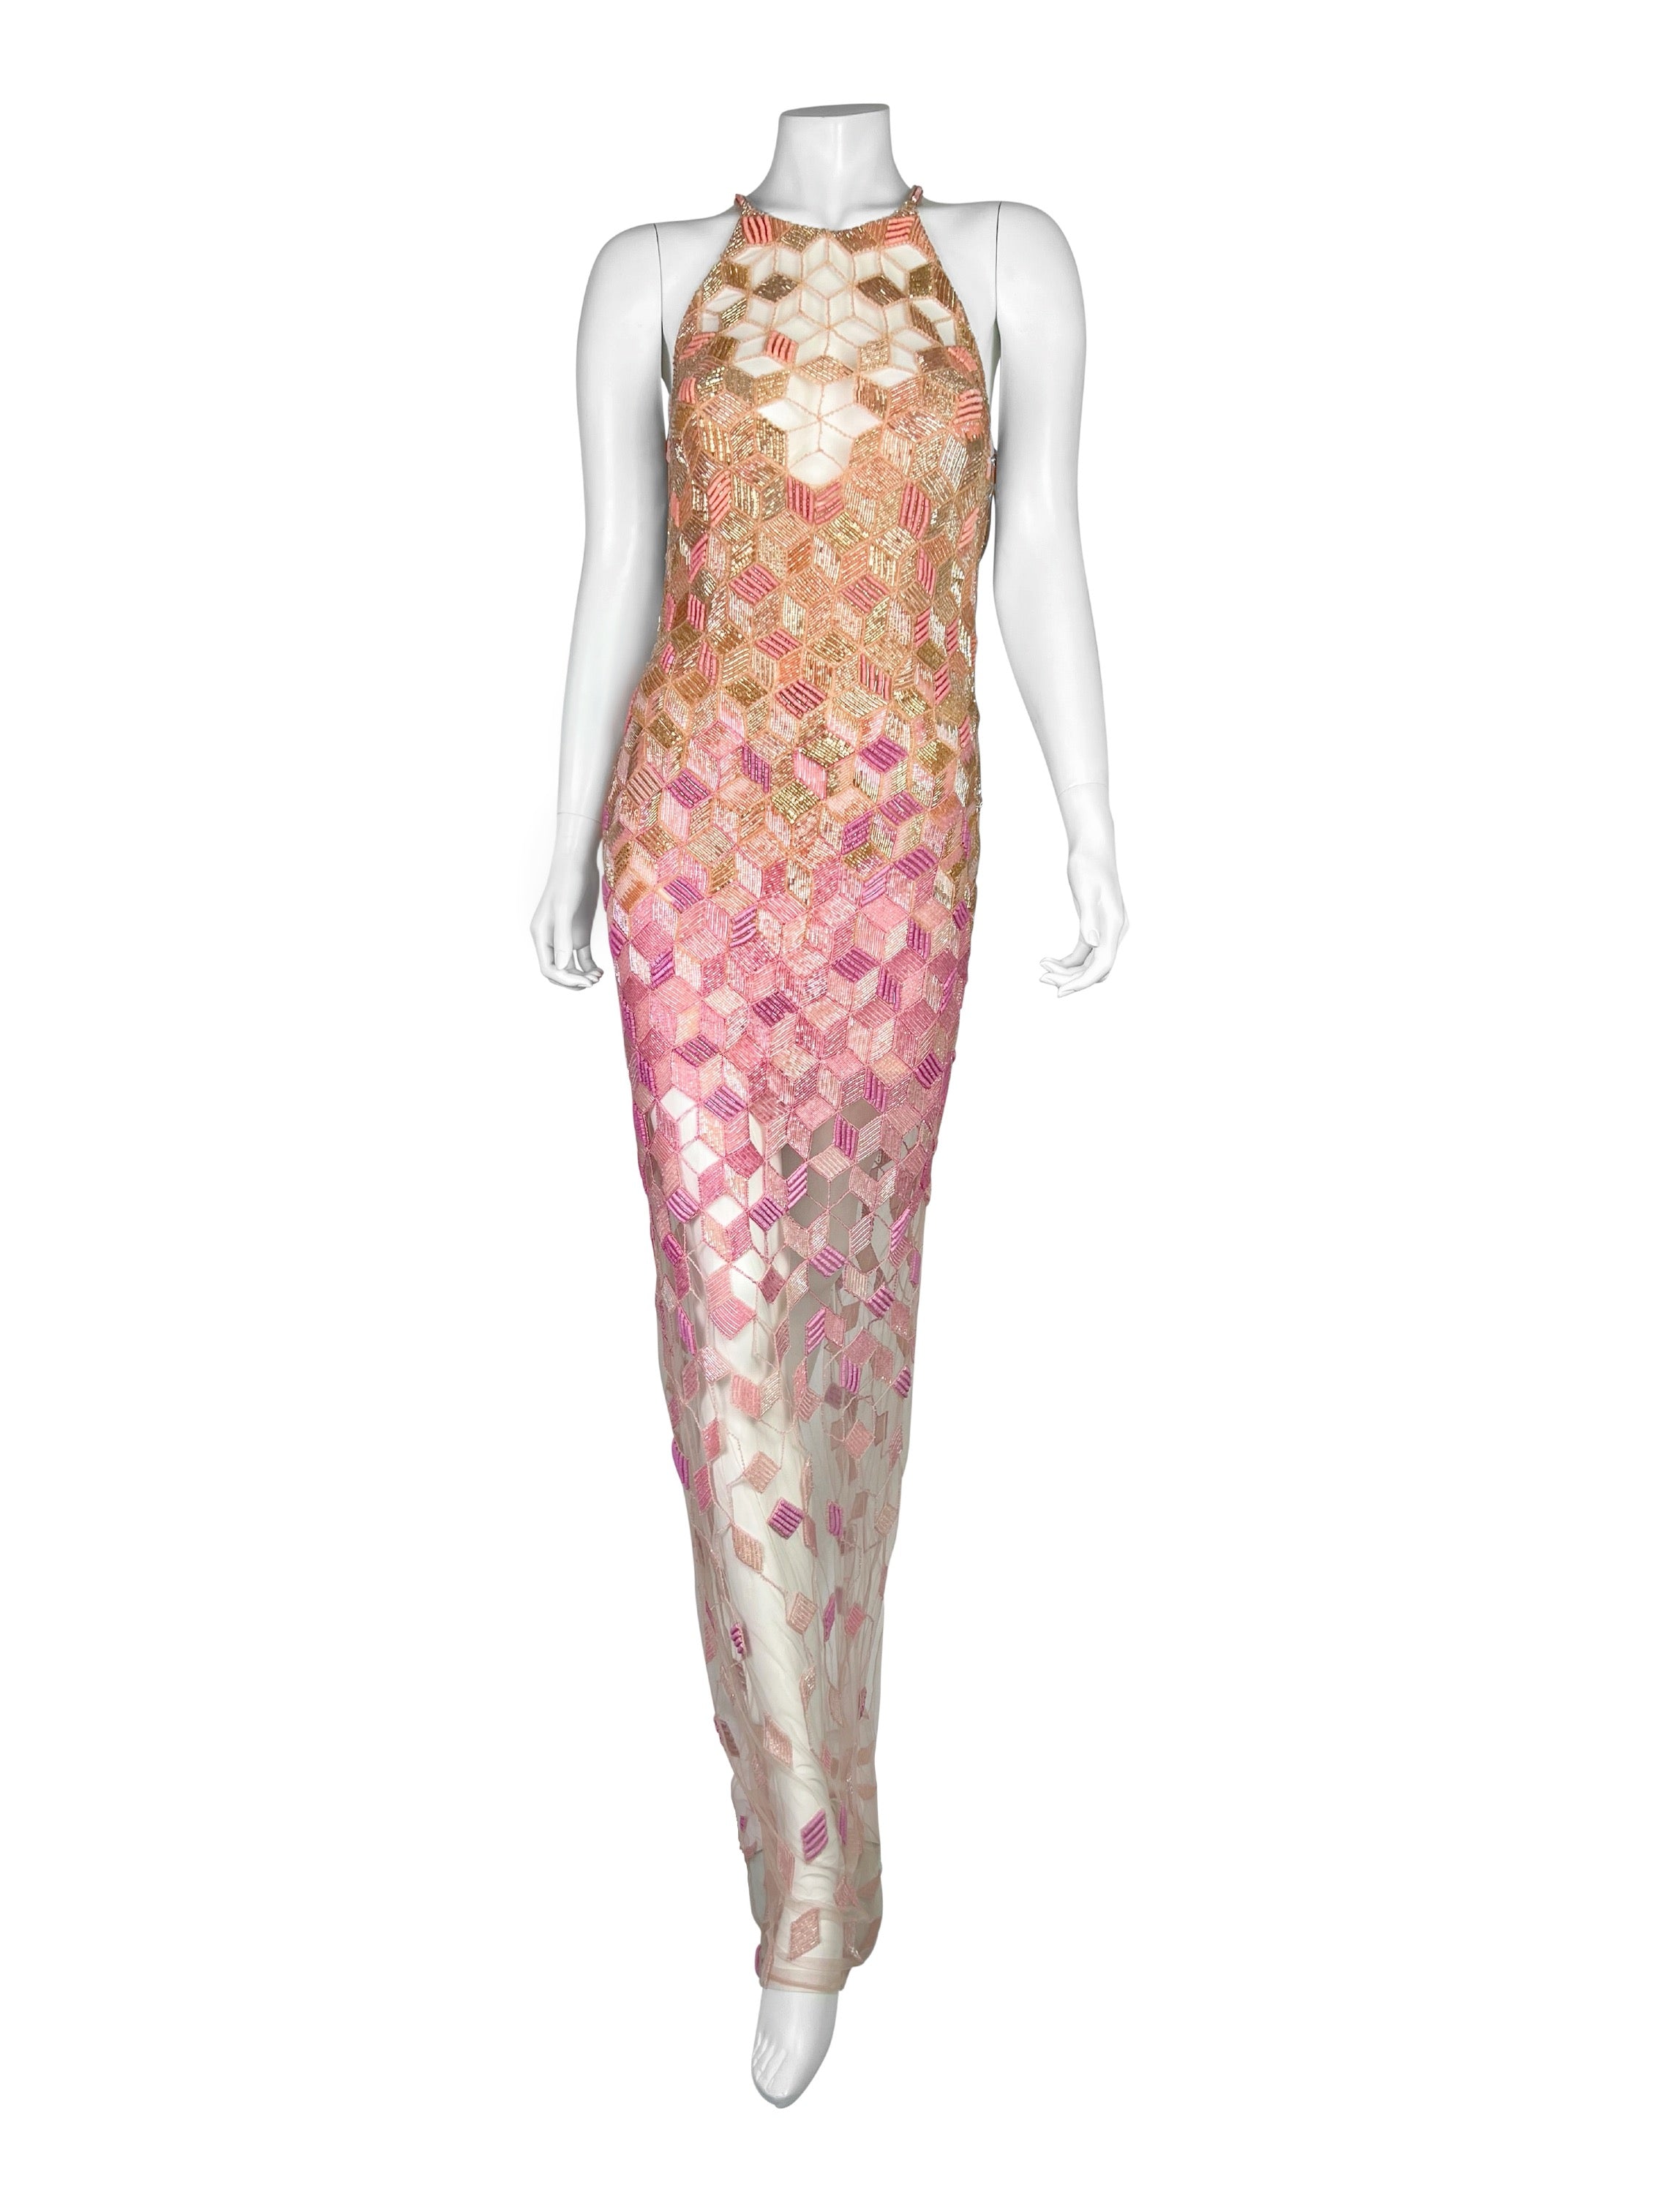 NWT Versace Spring 2015 Embellished Gown